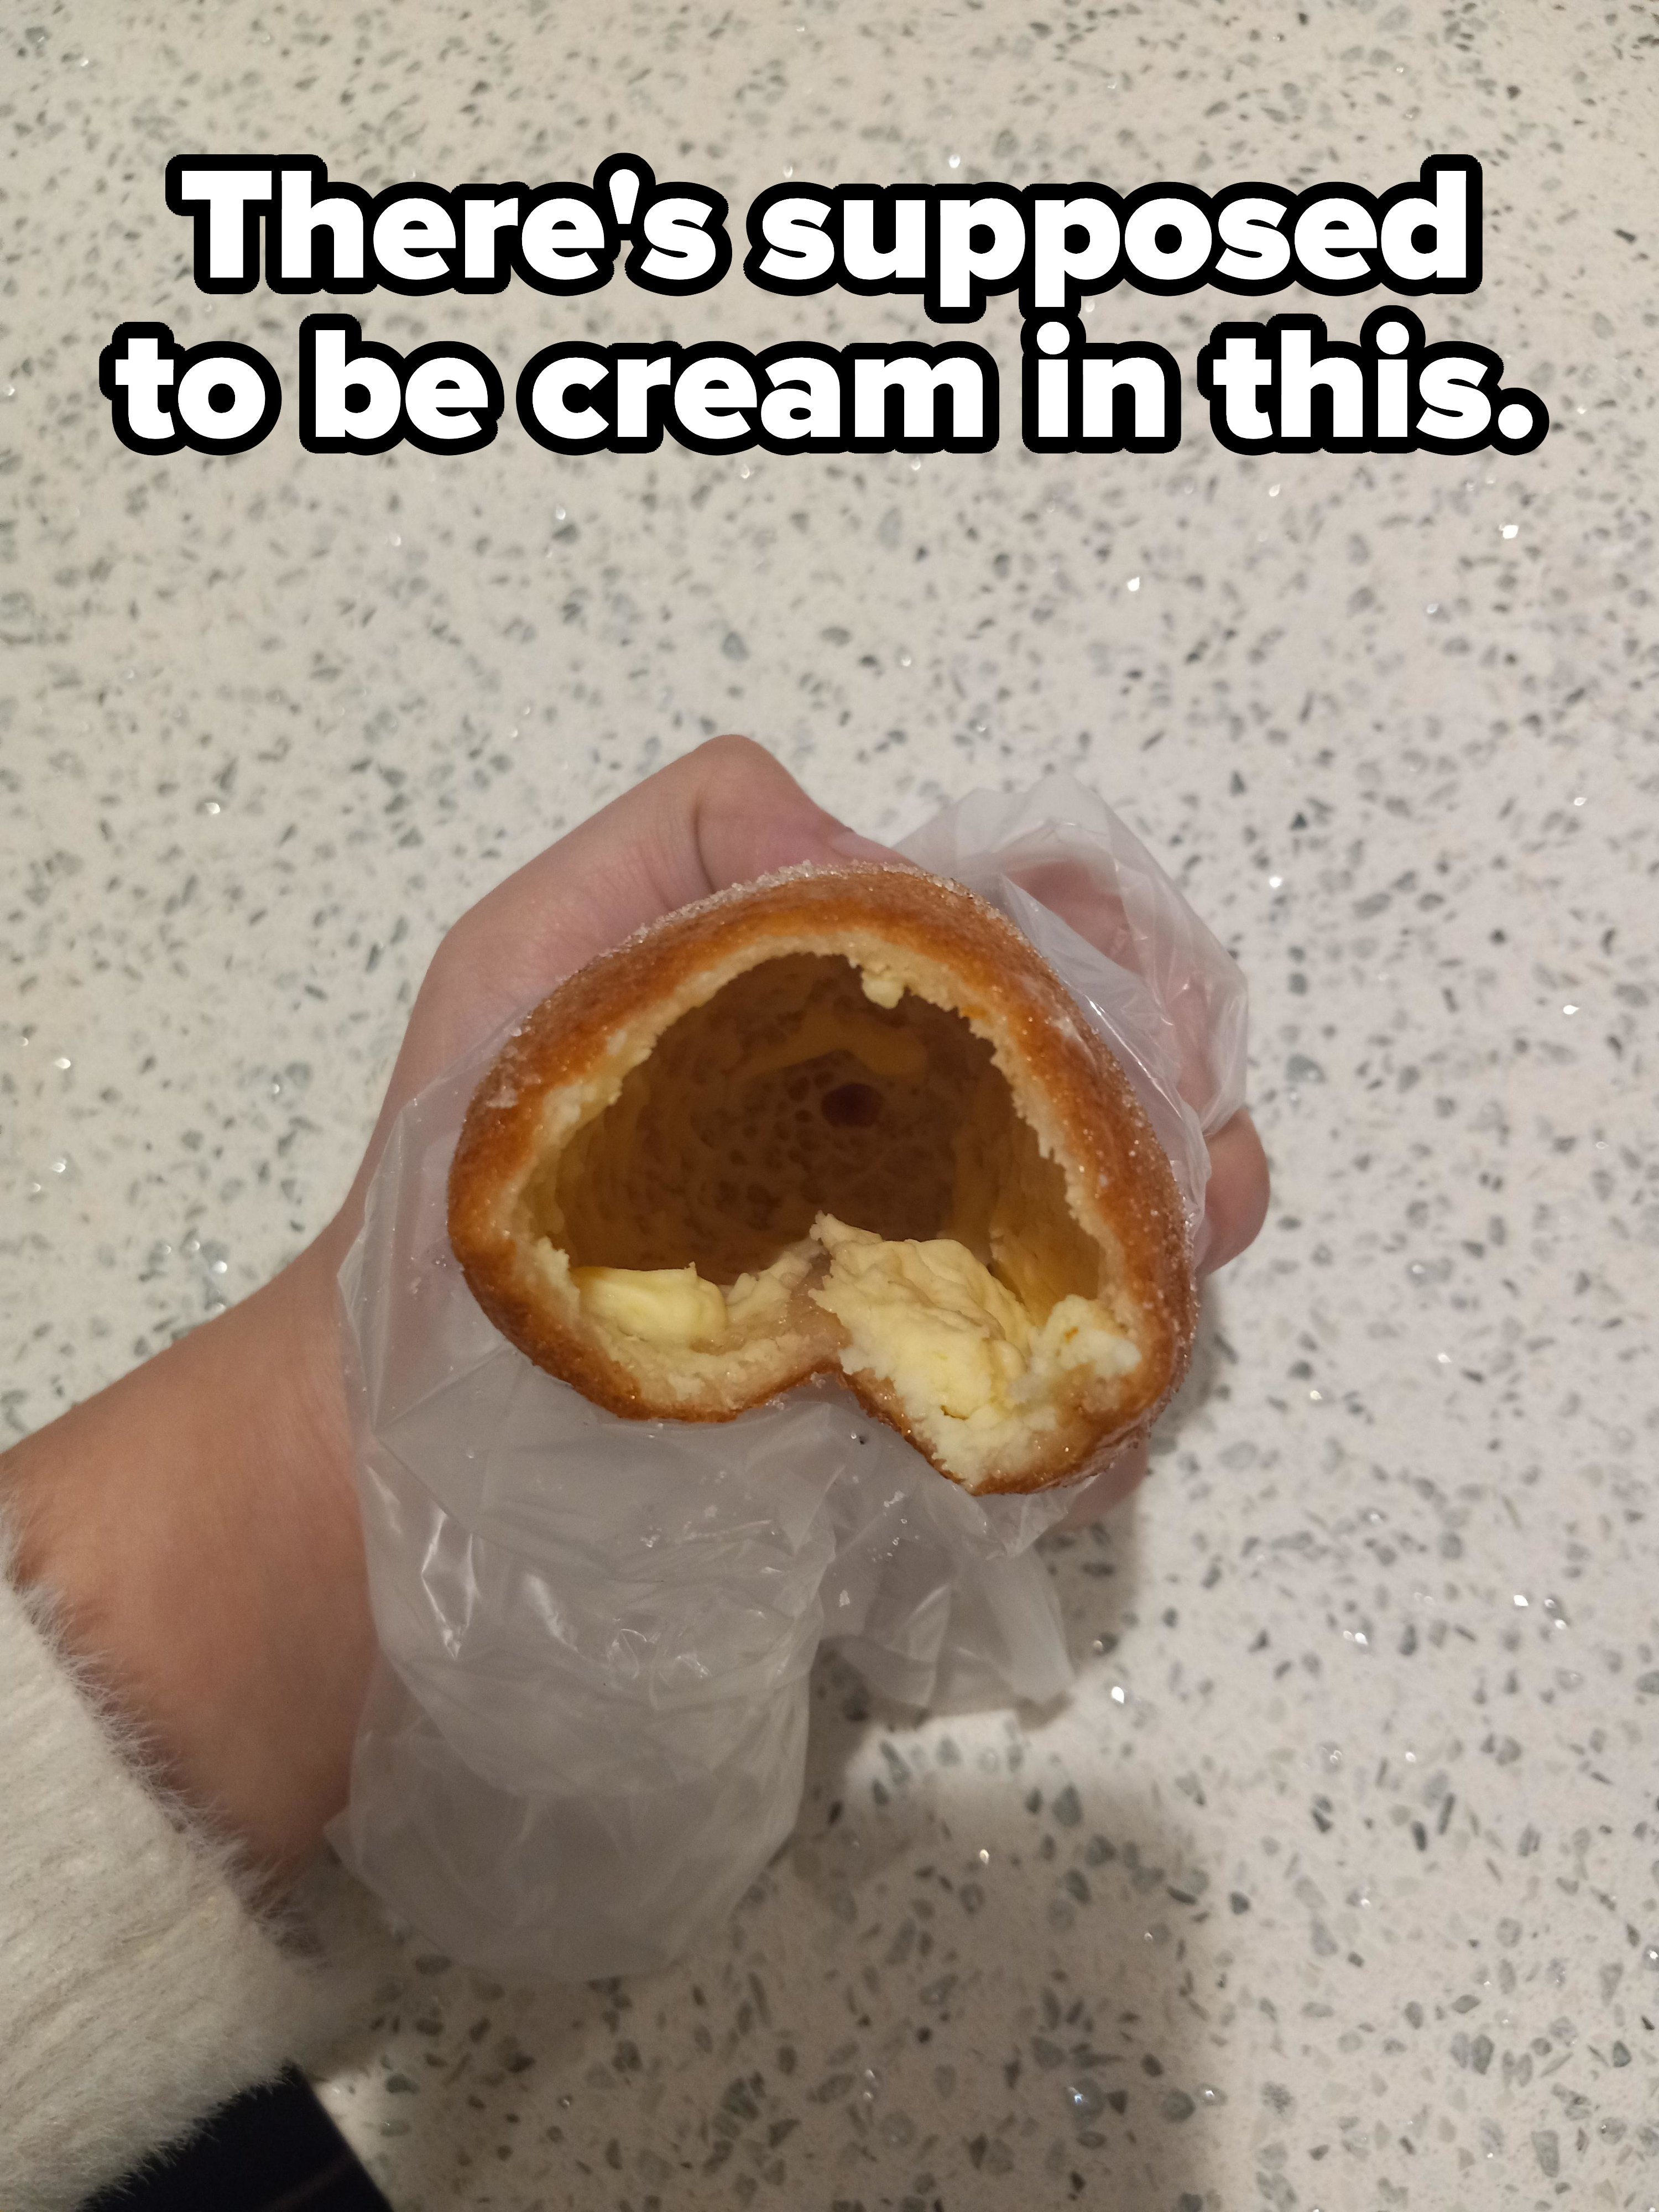 Cream-filled donut without any cream